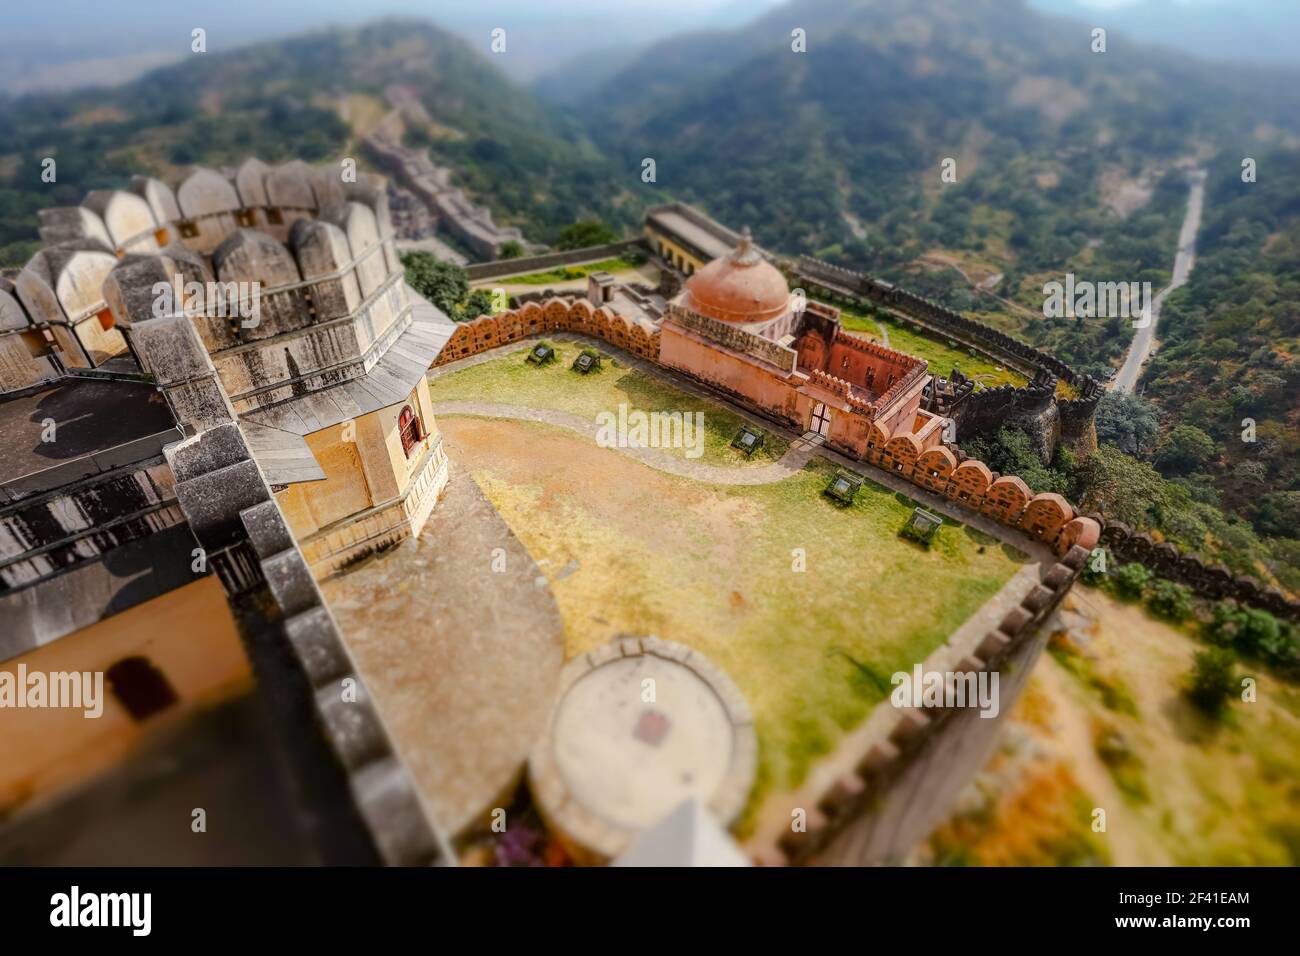 Tilt shift lens - Kumbhalgarh is a Mewar fortress on the westerly range of Aravalli Hills, in the Rajsamand district near Udaipur of Rajasthan state in western India. Stock Photo